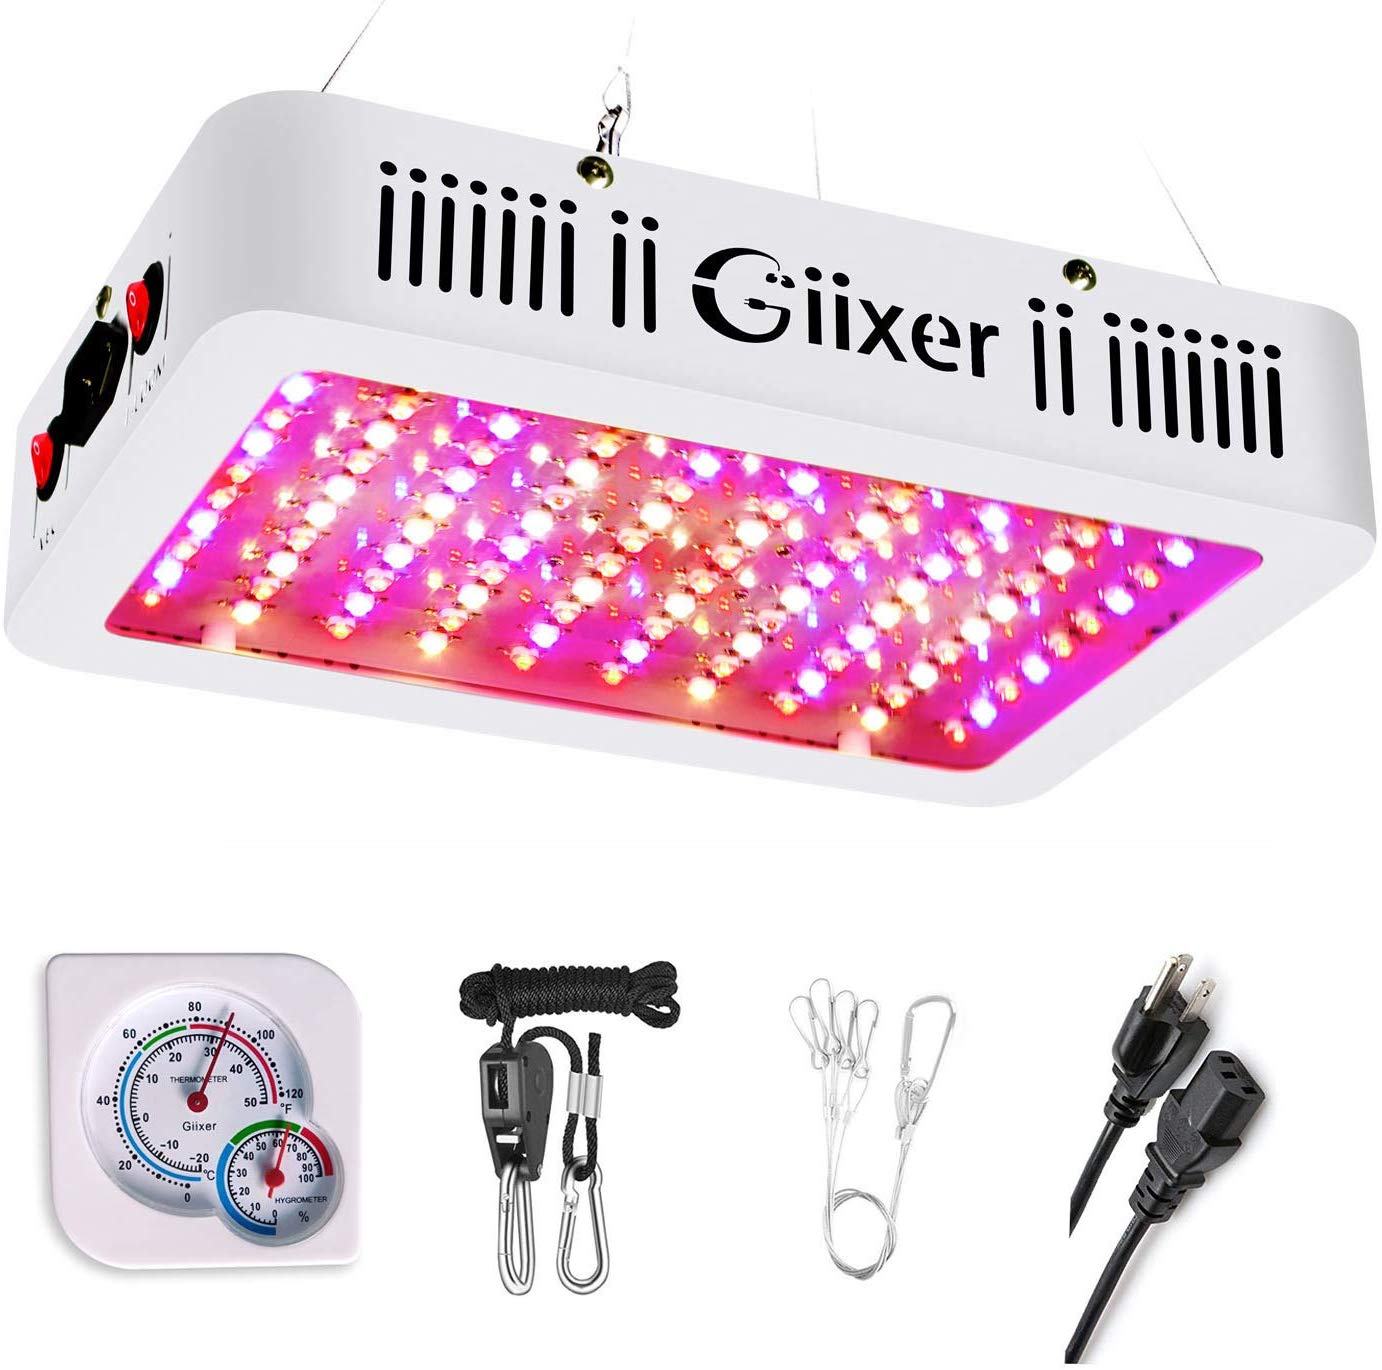 Giixer 1000W Dual Chips LED Grow Light for Medicinal Plants for